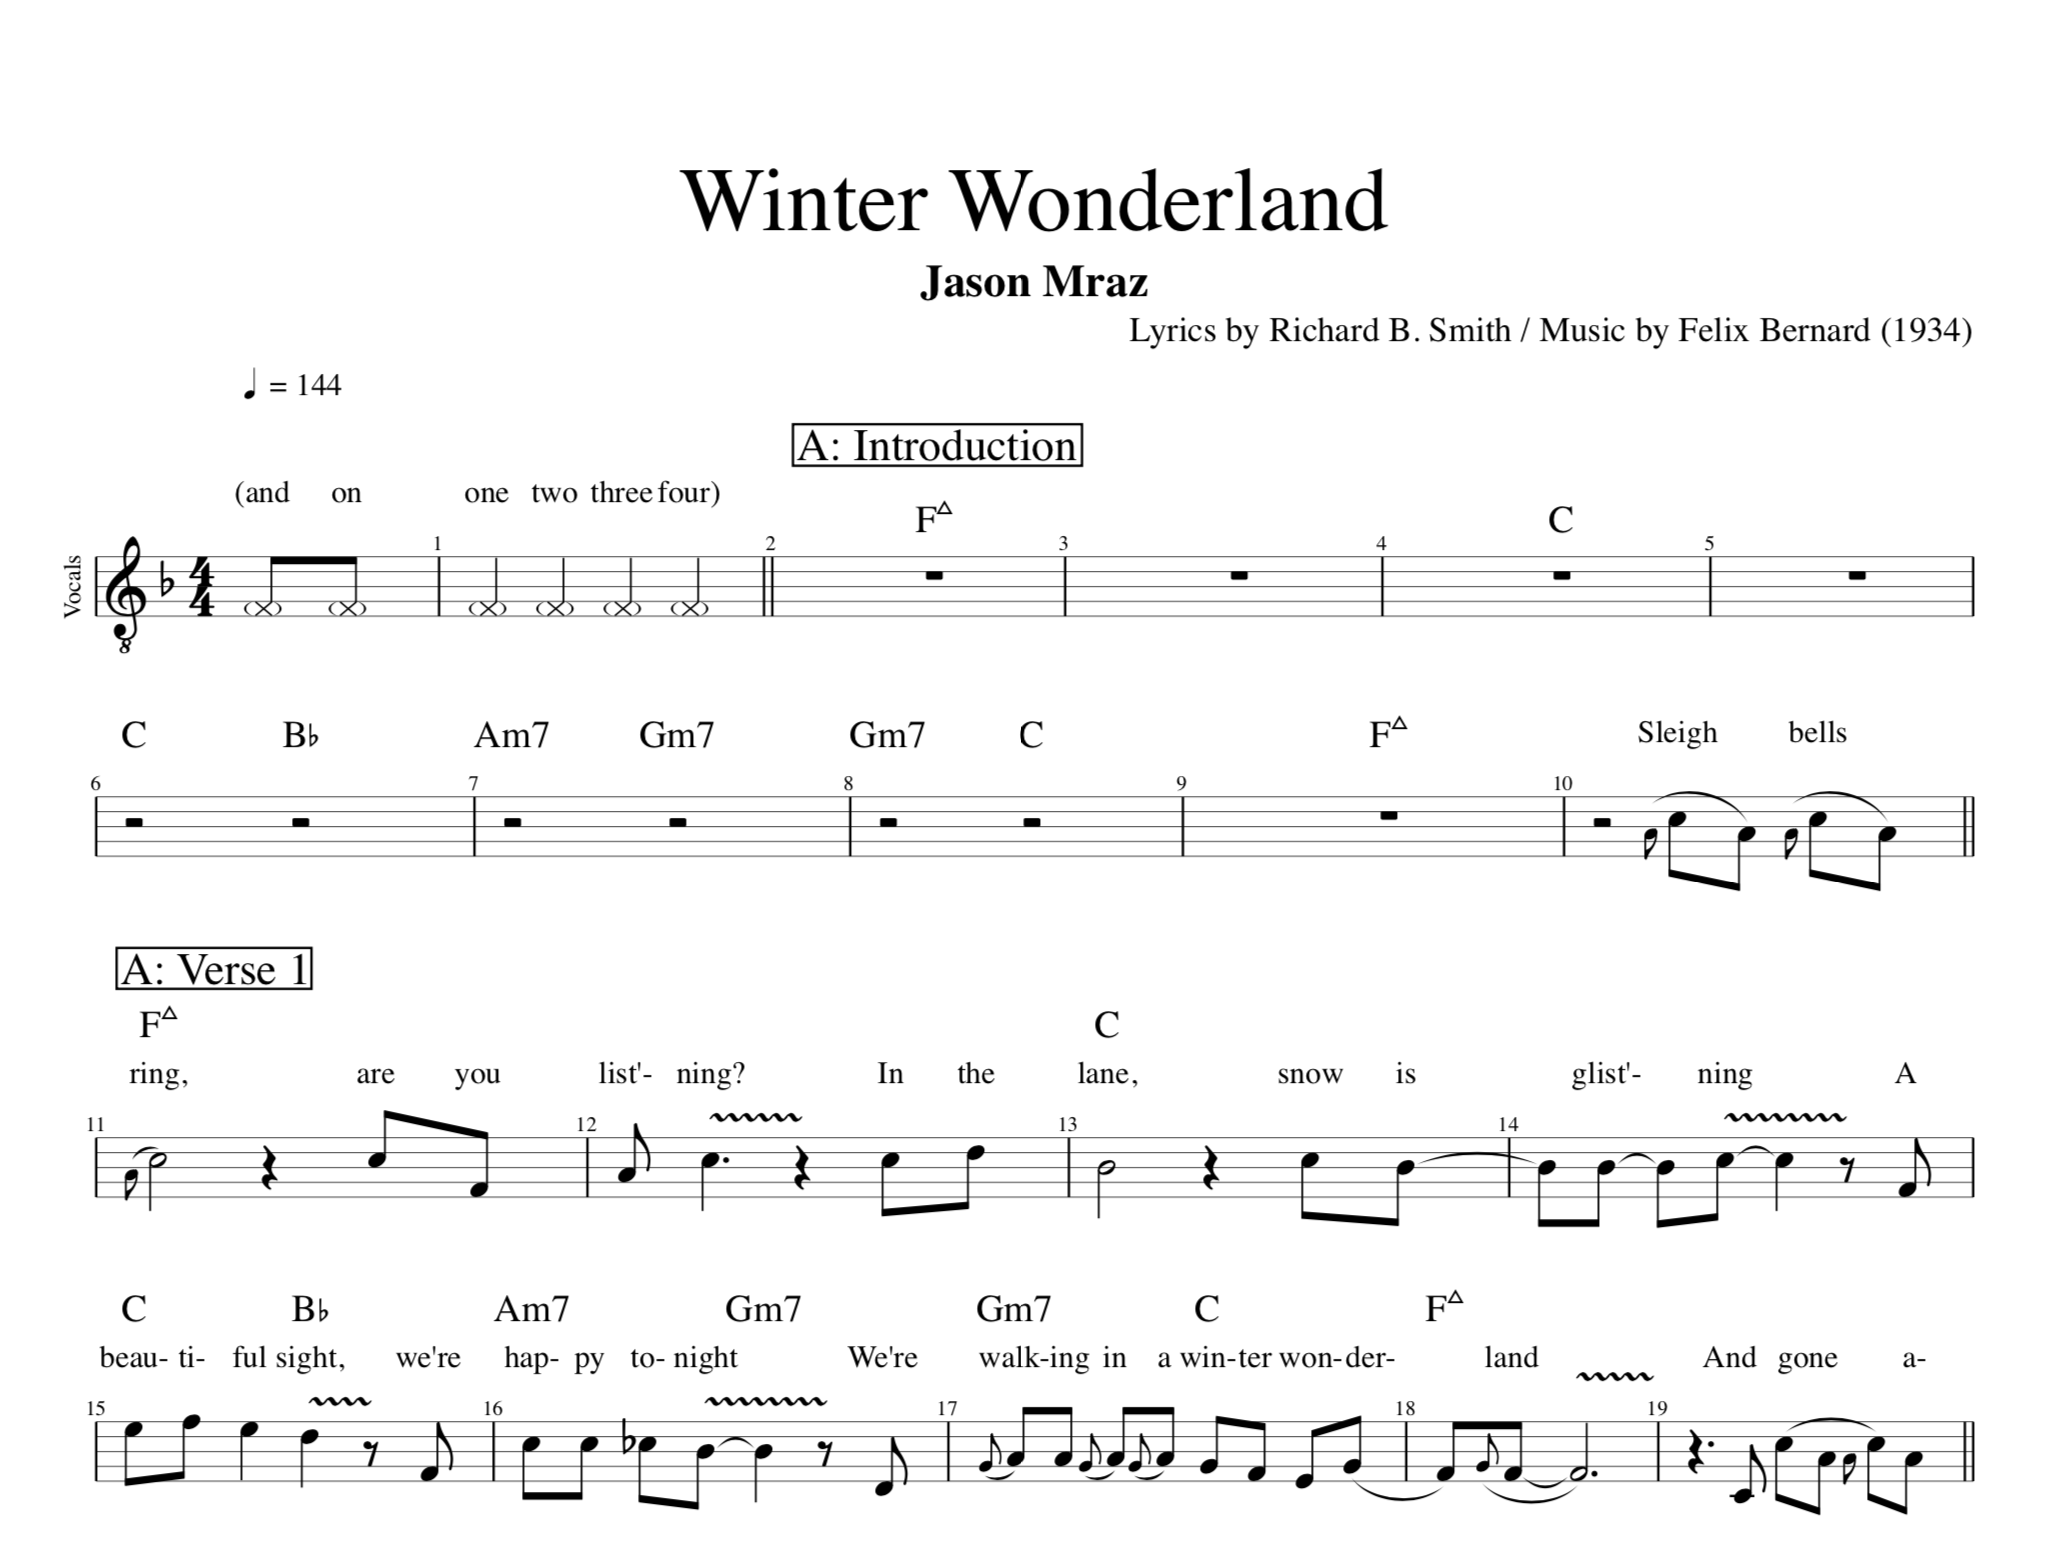 How do you play winter wonderland on acoustic guitar?